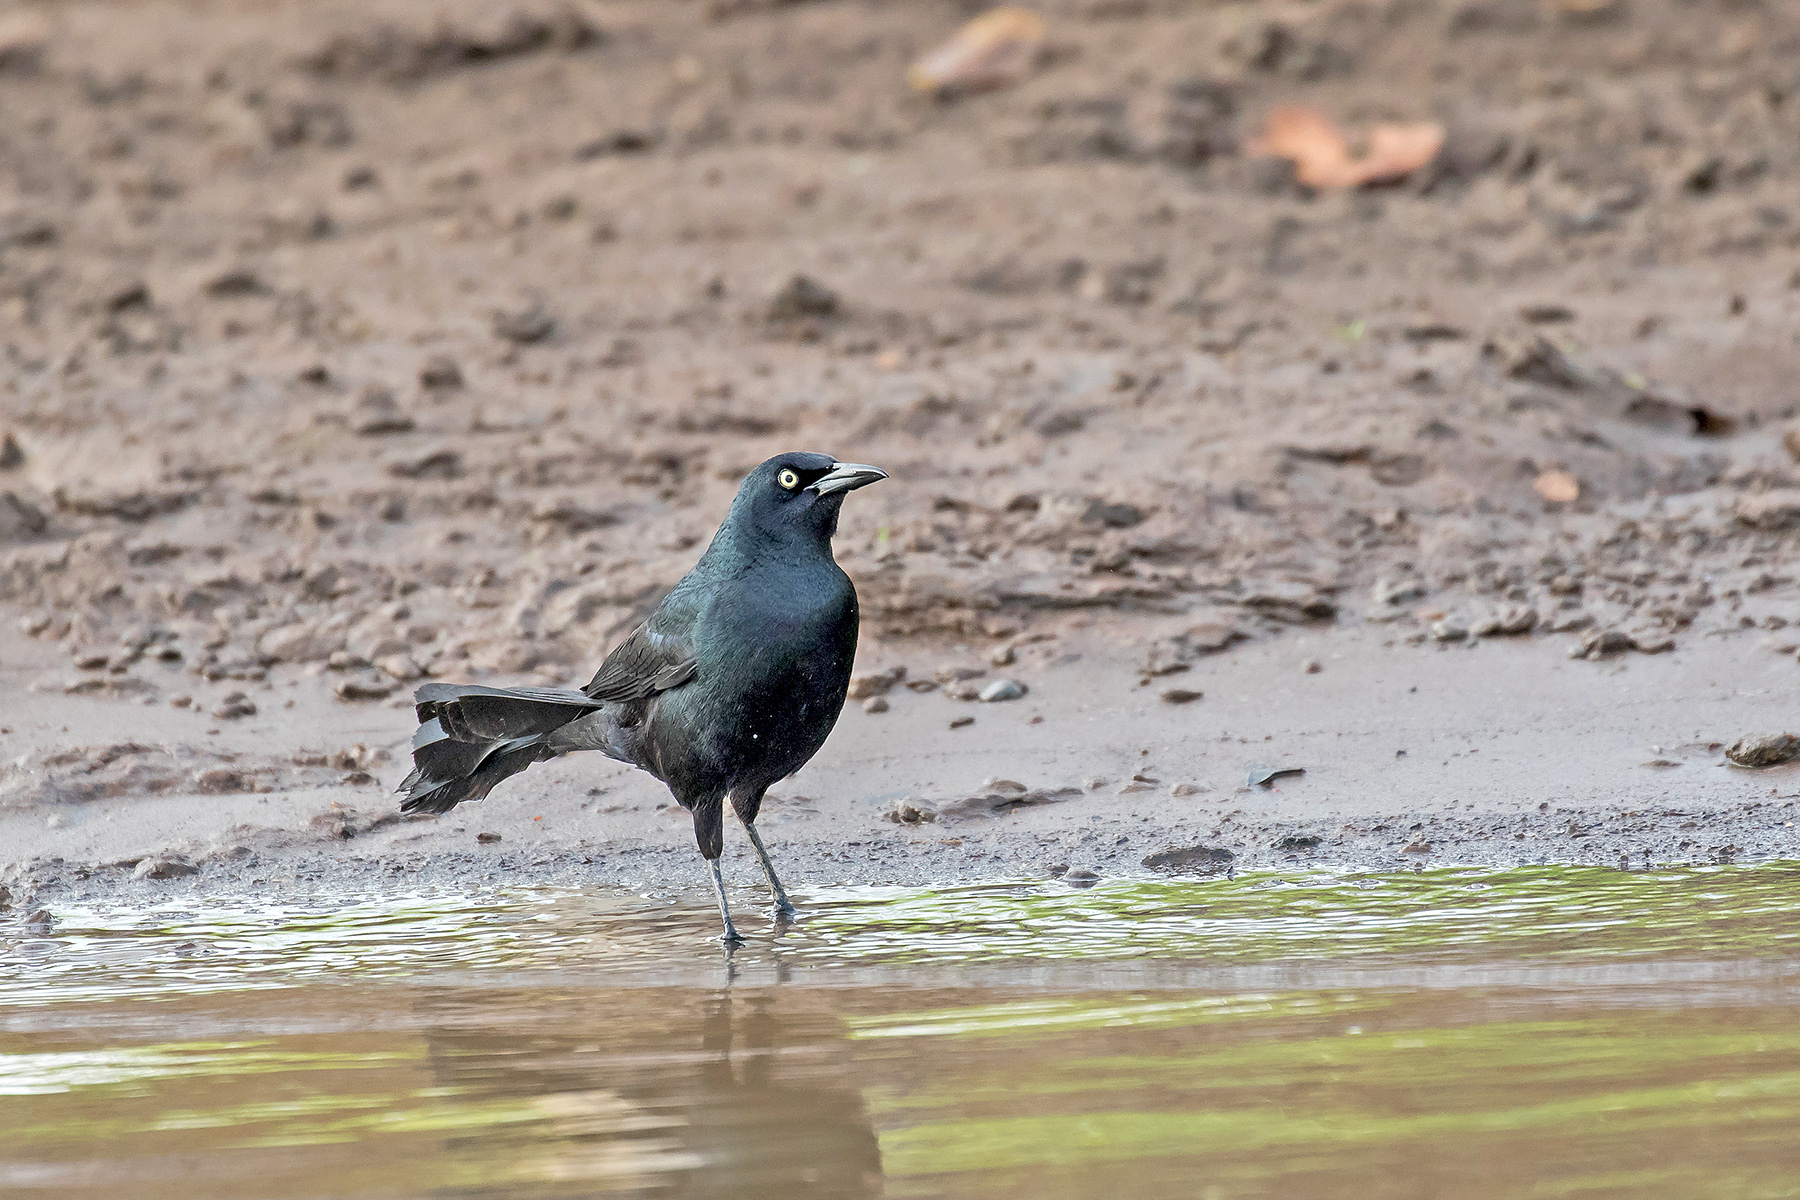 Nicaraguan Grackle on our Costa Rica birding tour (image by Pete Morris)